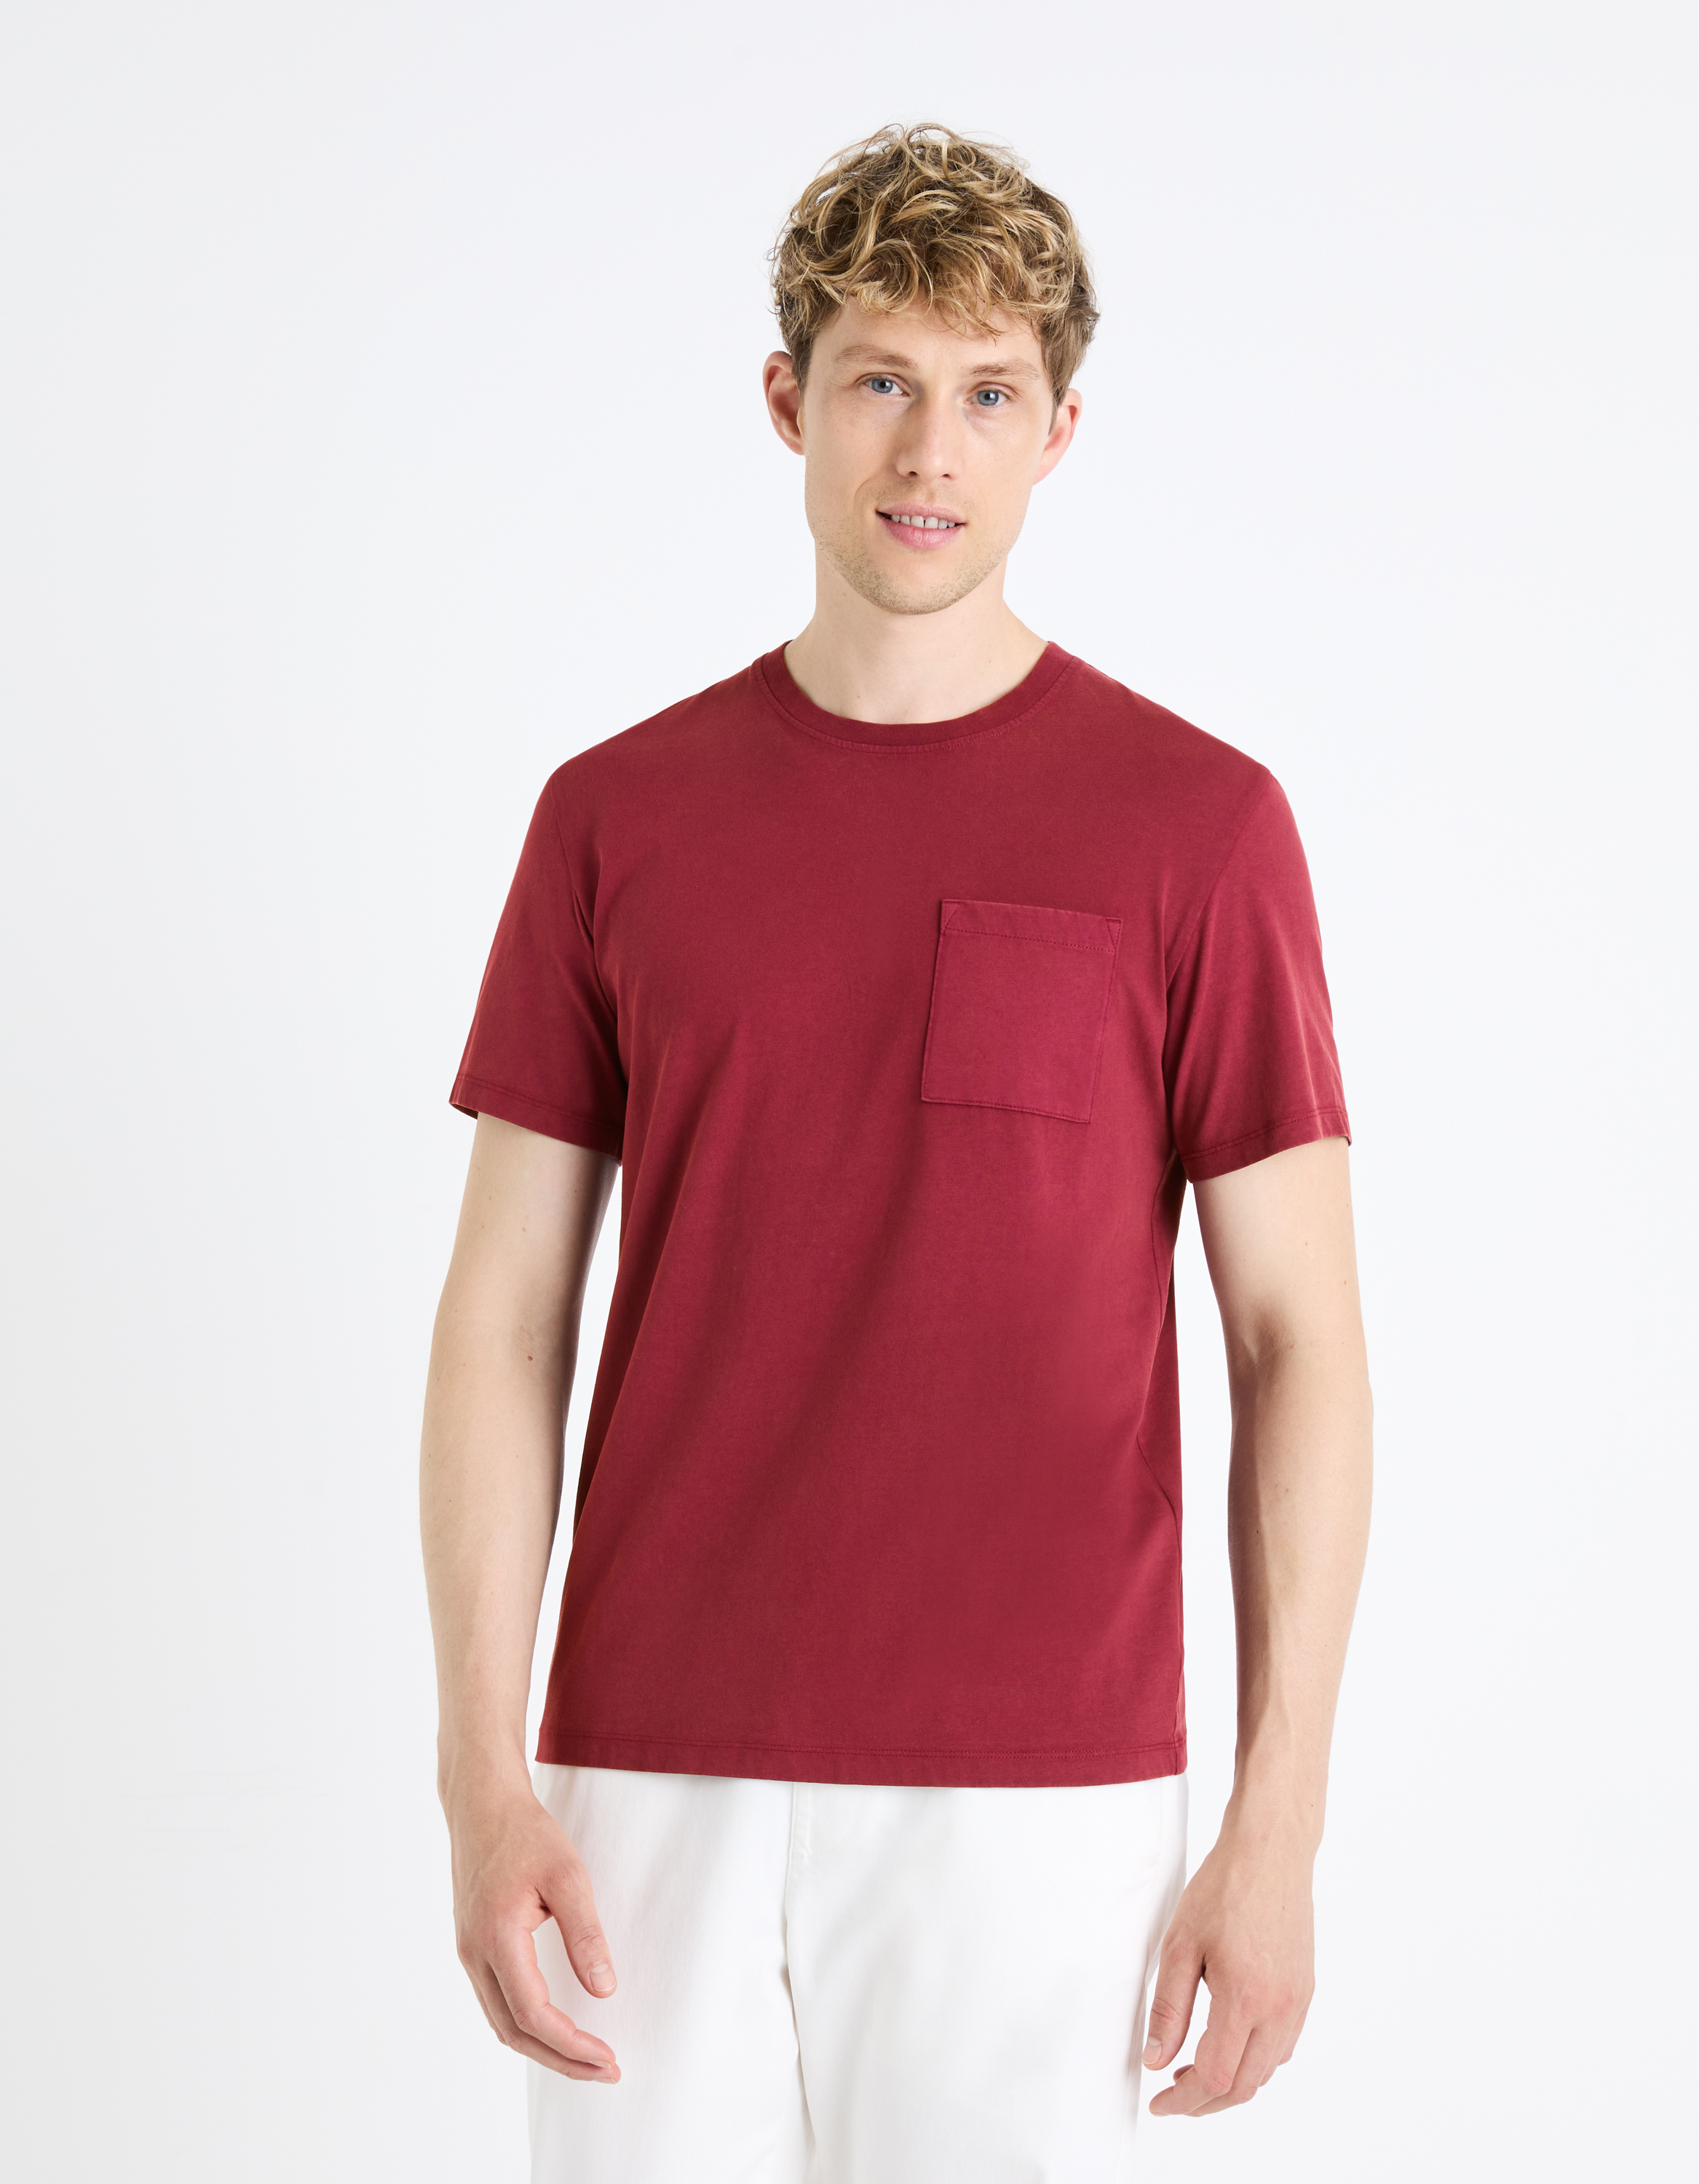 Celio T-Shirt with Pocket Feused - Men's